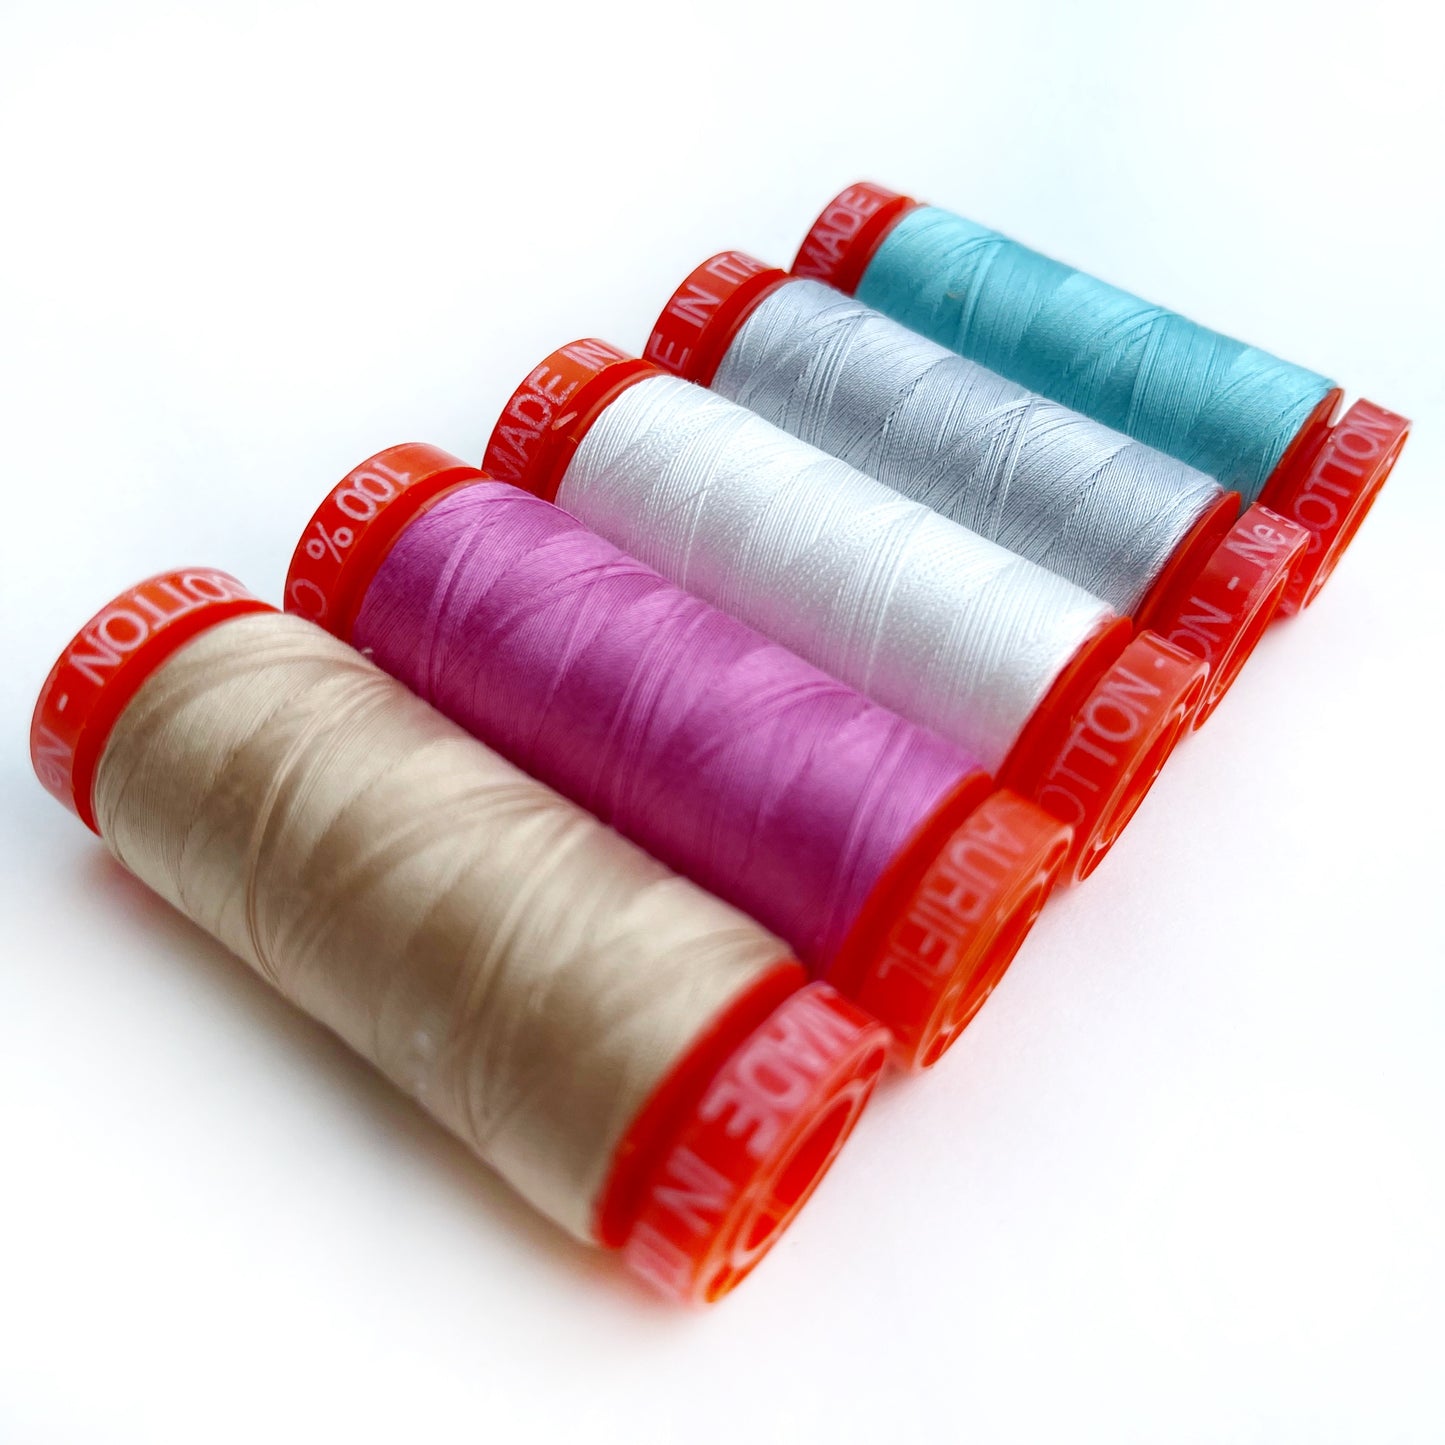 Jump into Quilting Aurifil Thread Collection